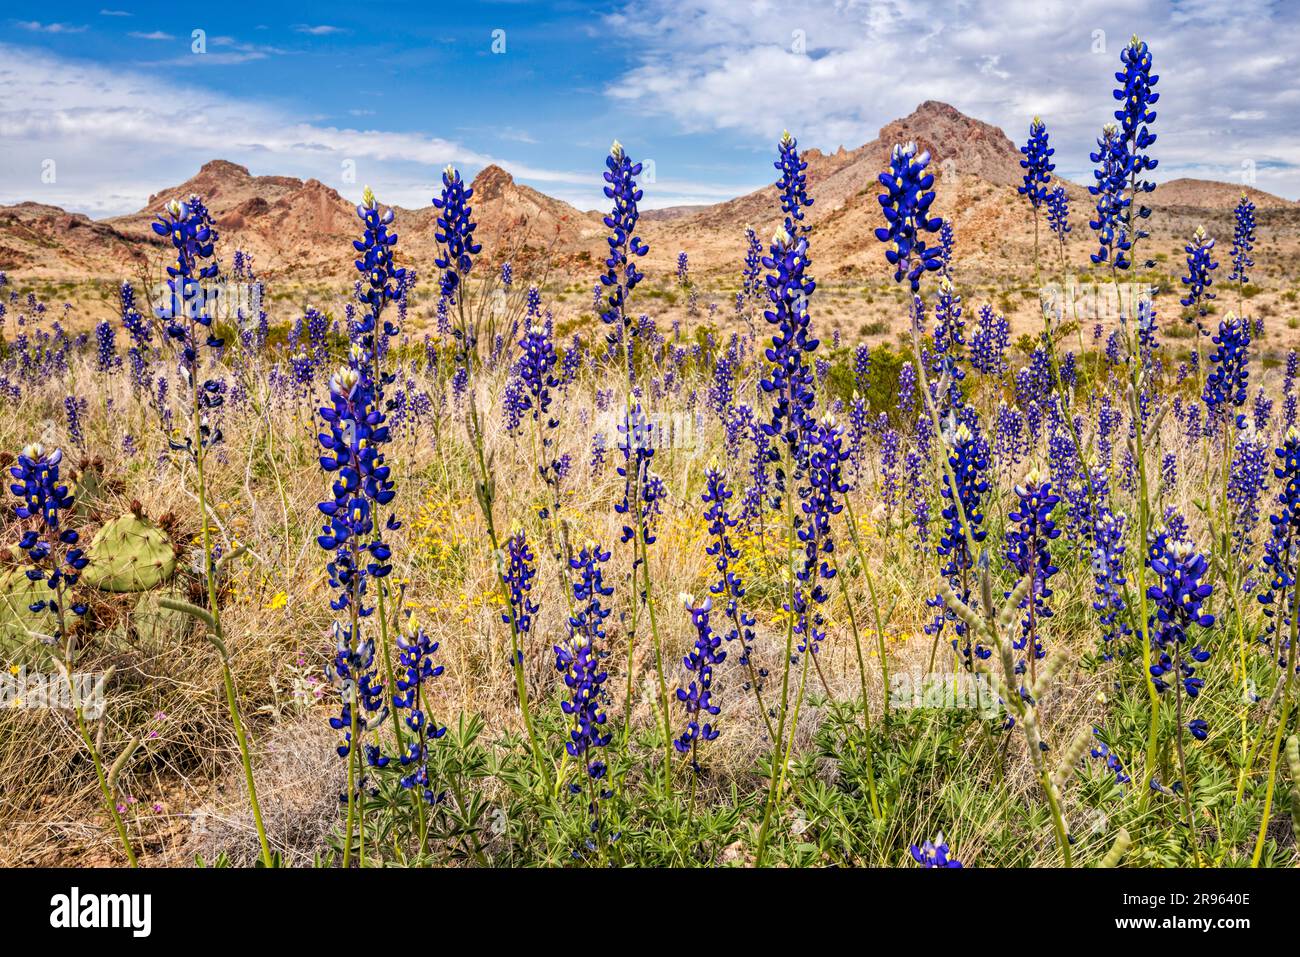 Bluebonnets blooming in March, Ross Maxwell Scenic Drive, Chihuahuan Desert, Big Bend National Park, Texas, USA Stock Photo